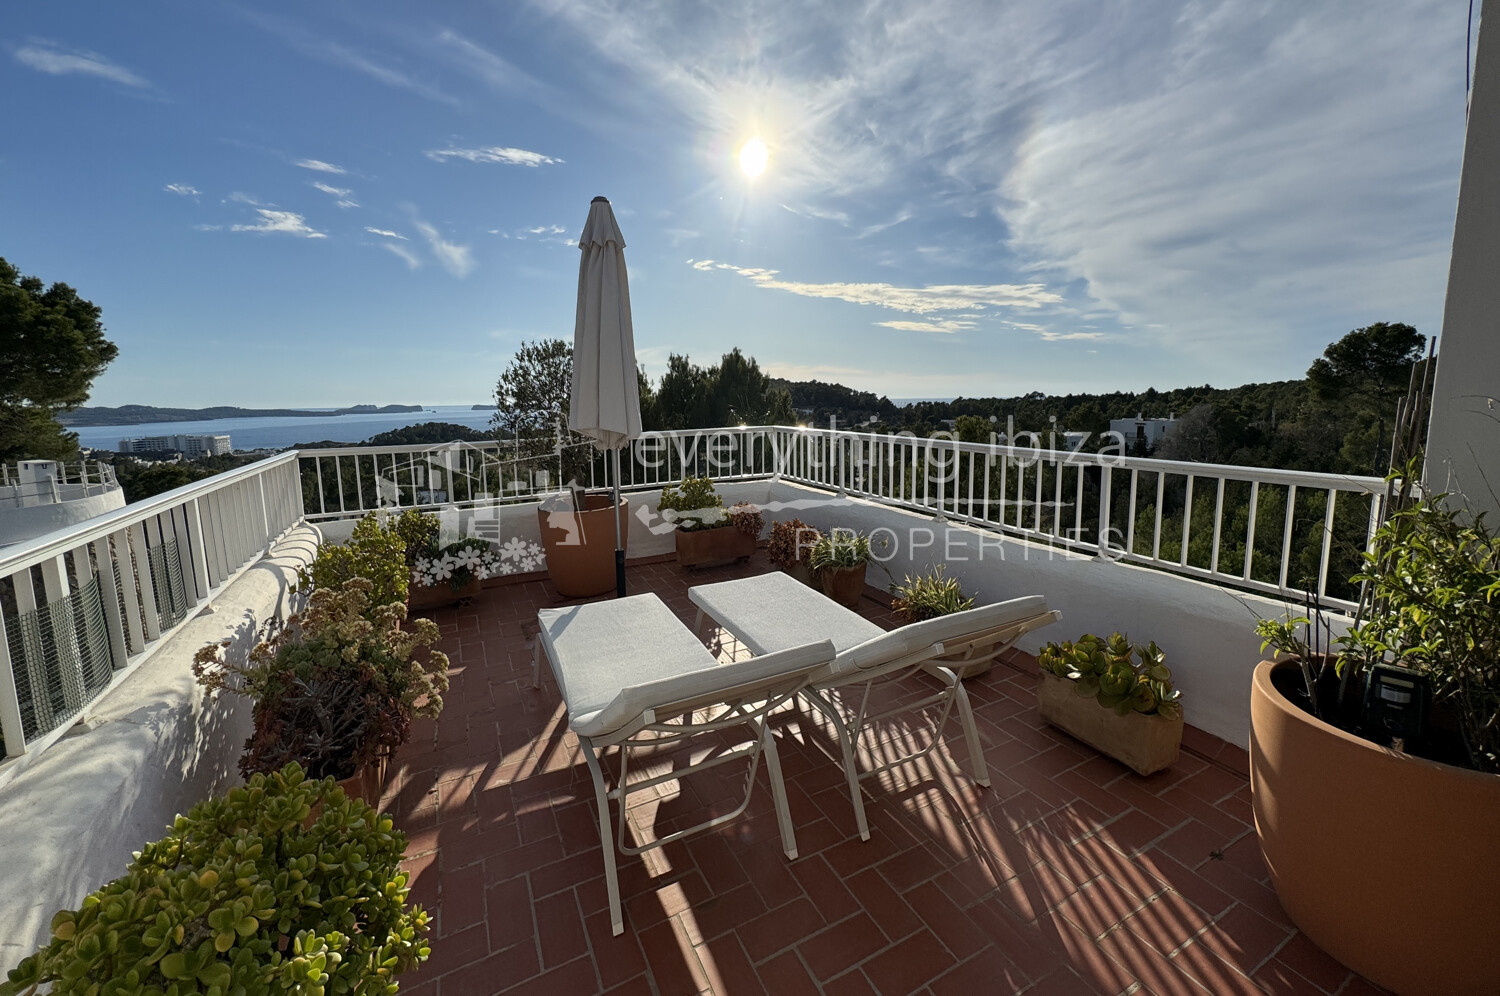 Charming Traditional Villa and 2 Separate Apartments with Super Sea & Sunset Views, ref. 1698, for sale in Ibiza by everything ibiza Properties